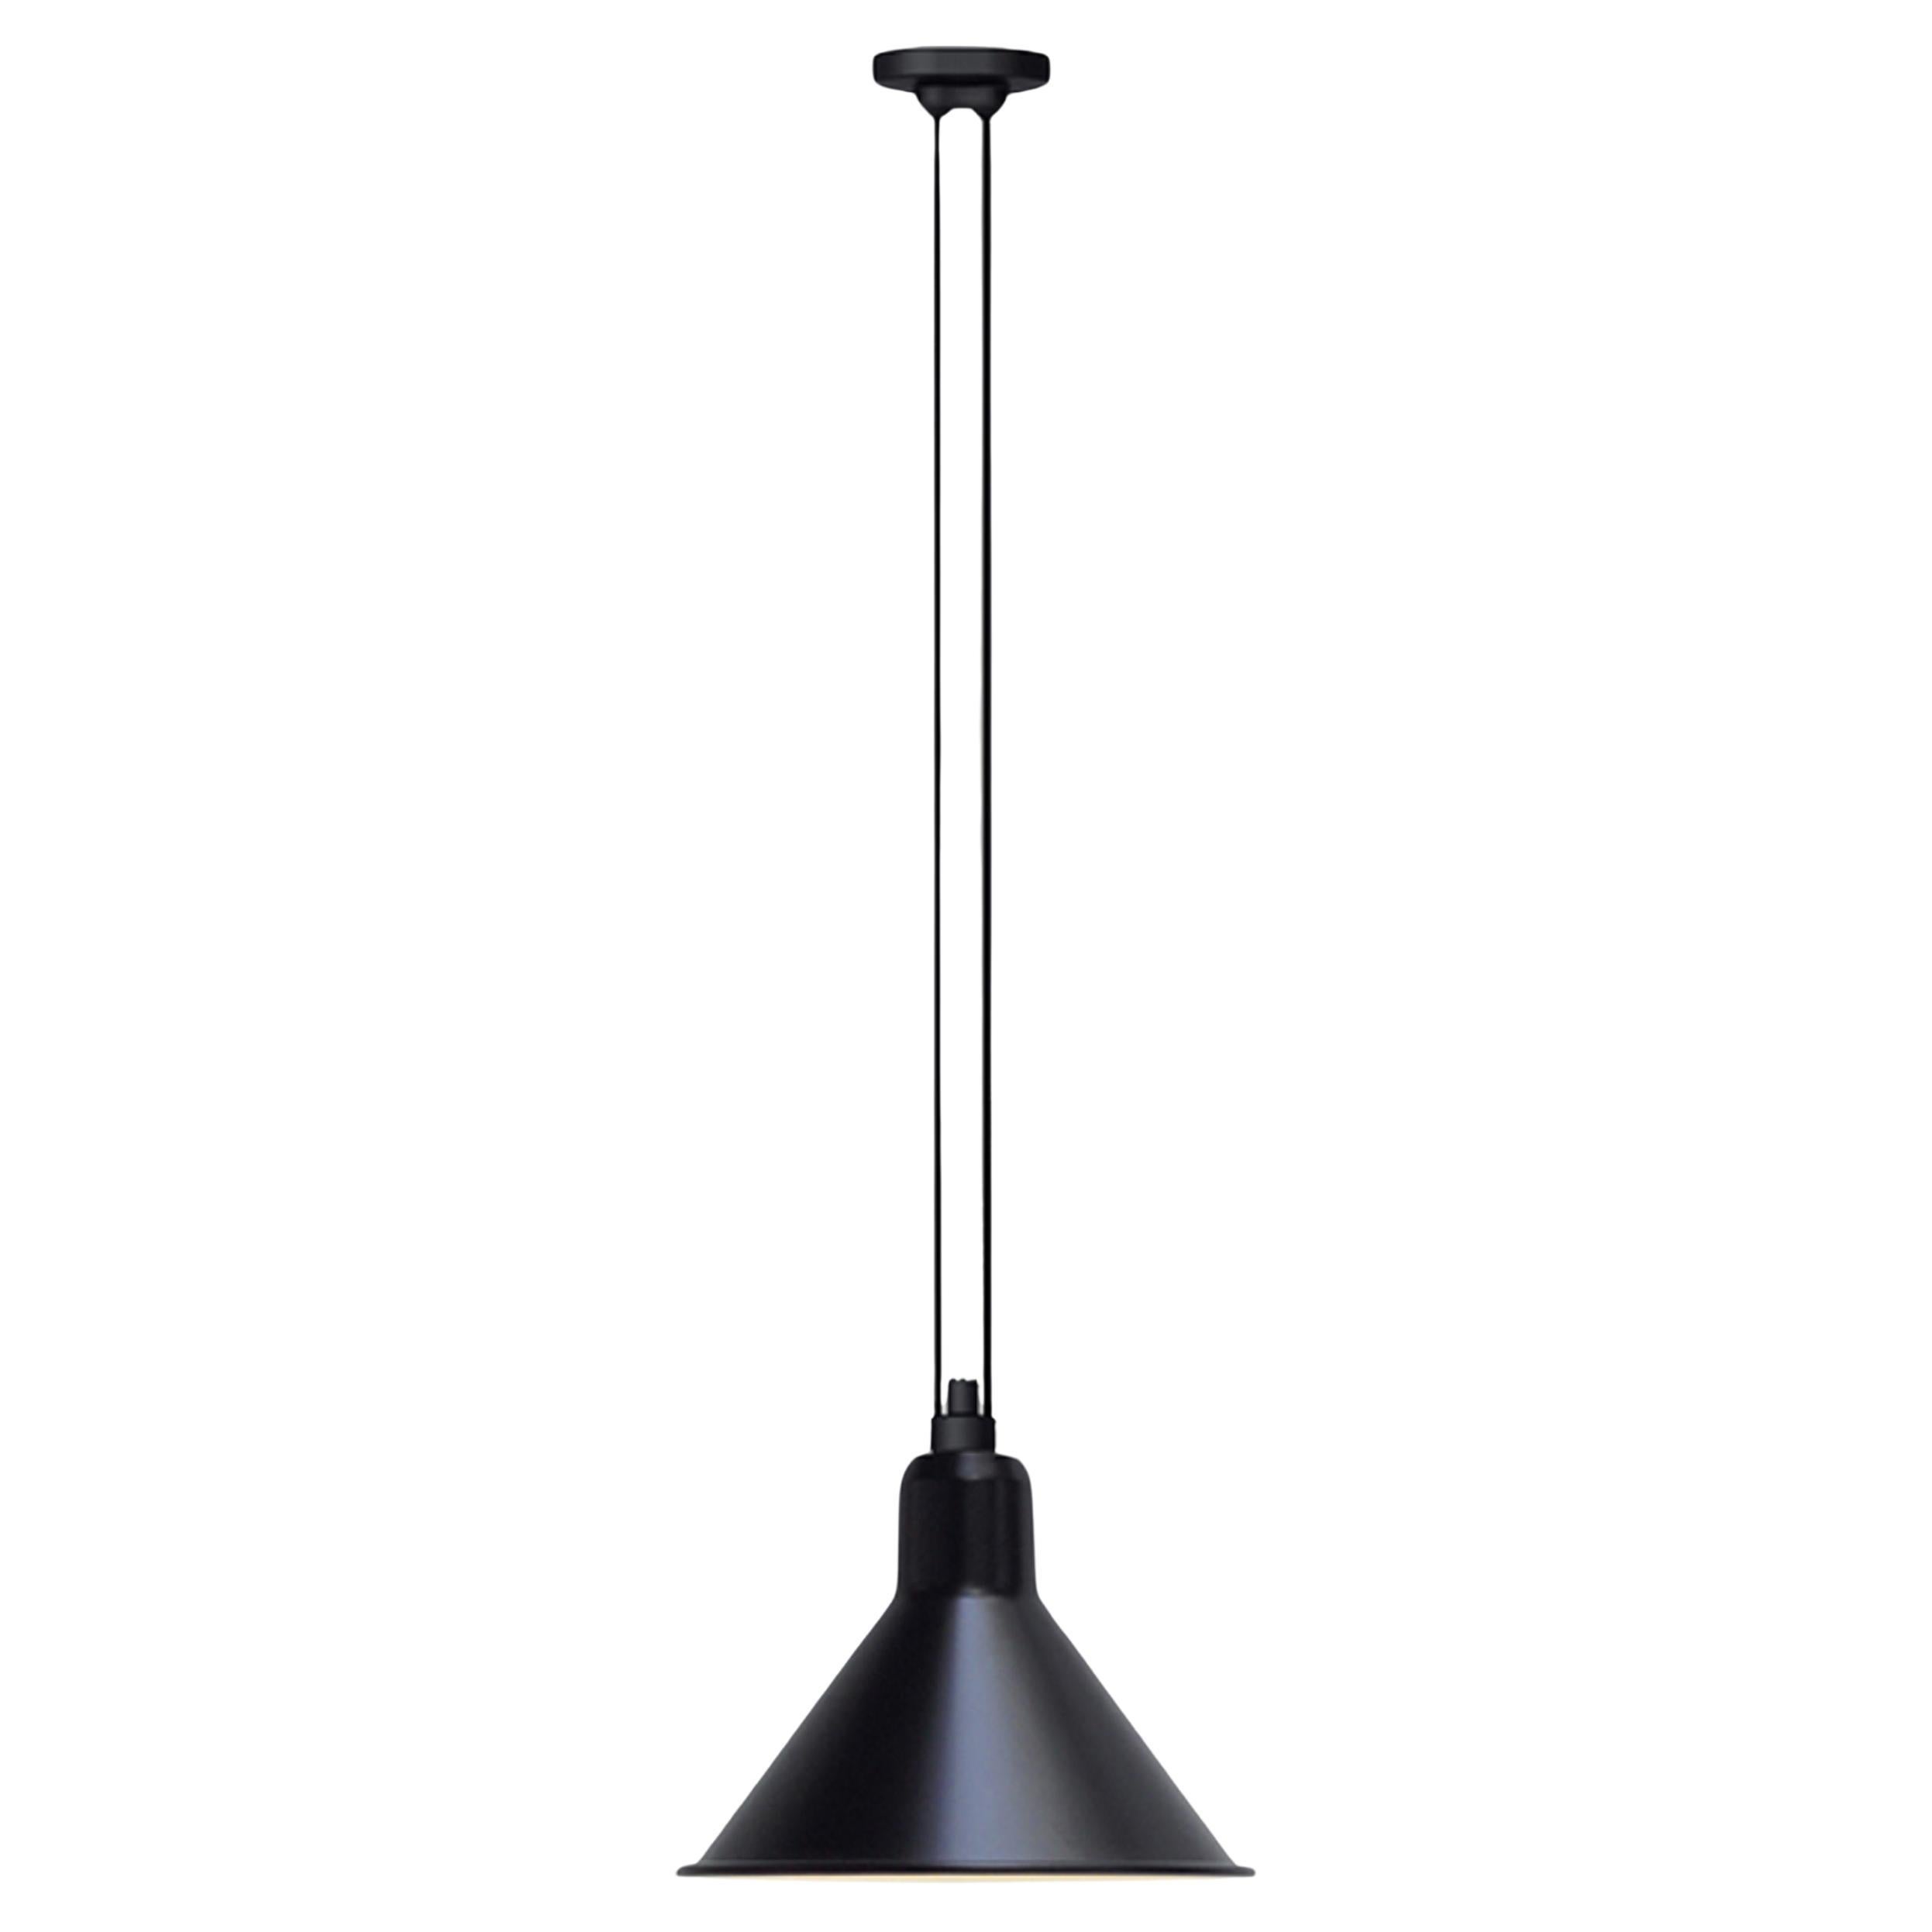 DCW Editions Les Acrobates N°322 XL Conic Pendant Lamp in Black Shade For Sale